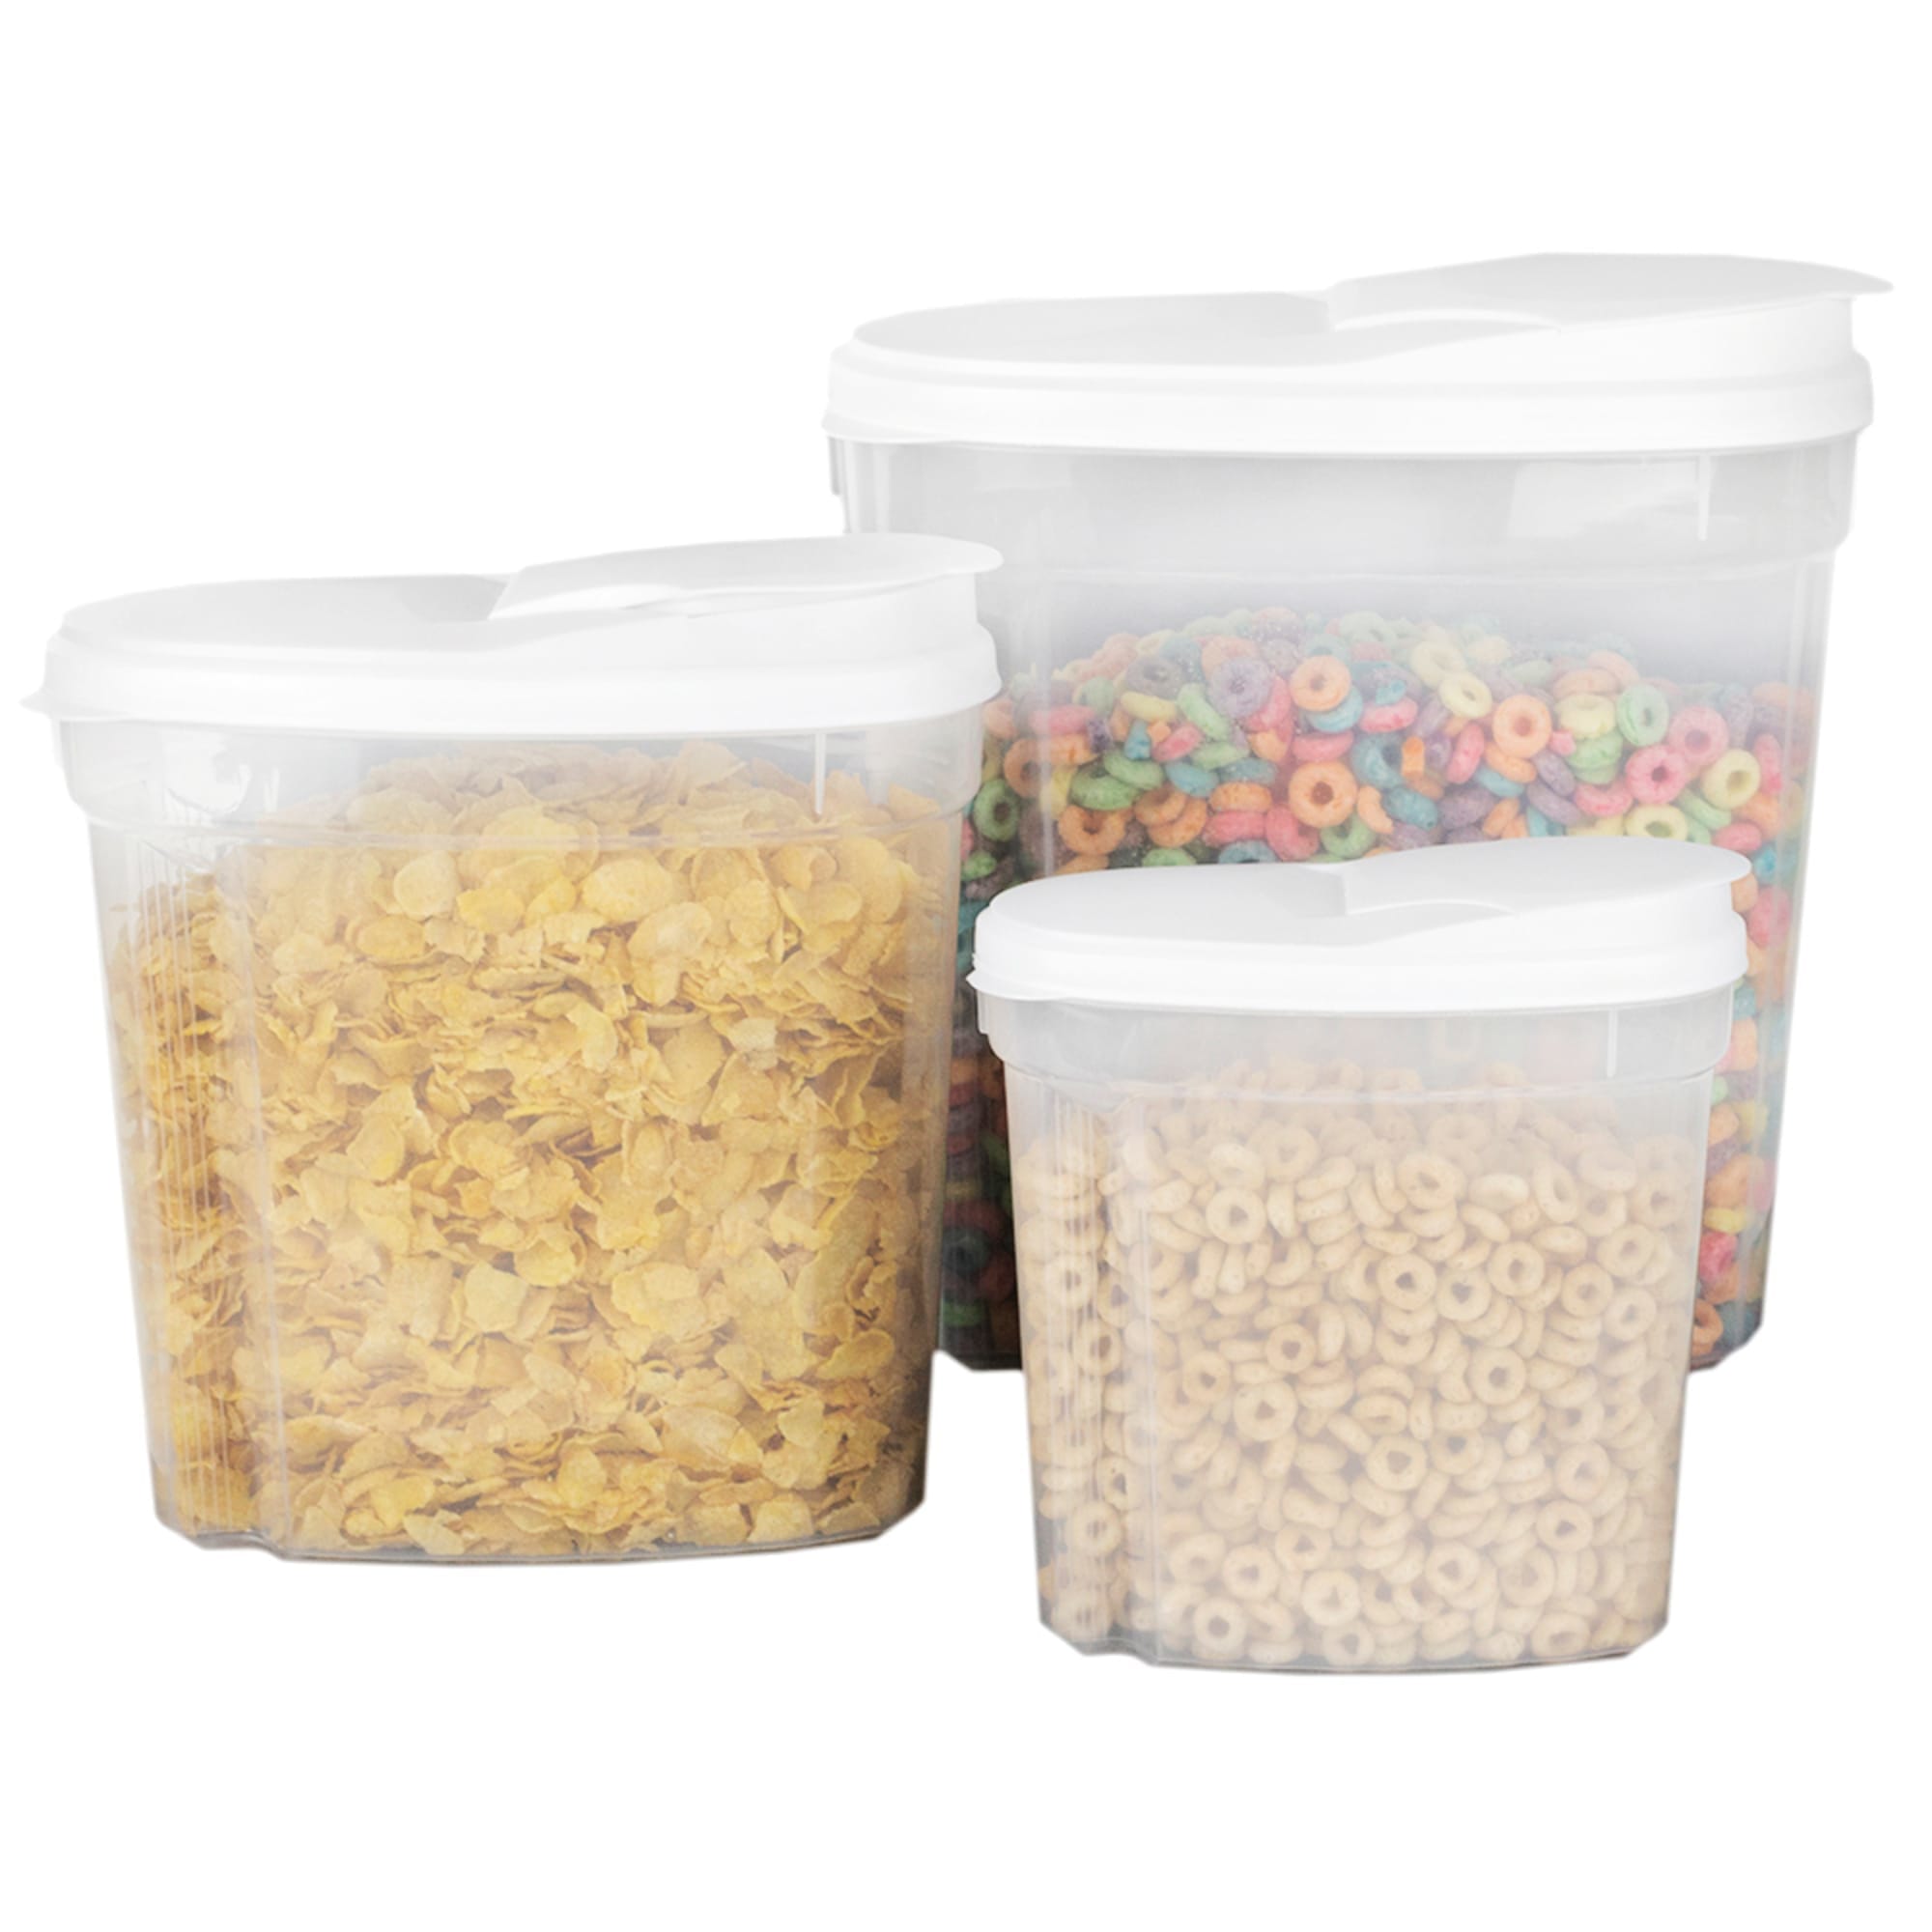 Home Basics 3 Piece Plastic Containers $8.00 EACH, CASE PACK OF 12